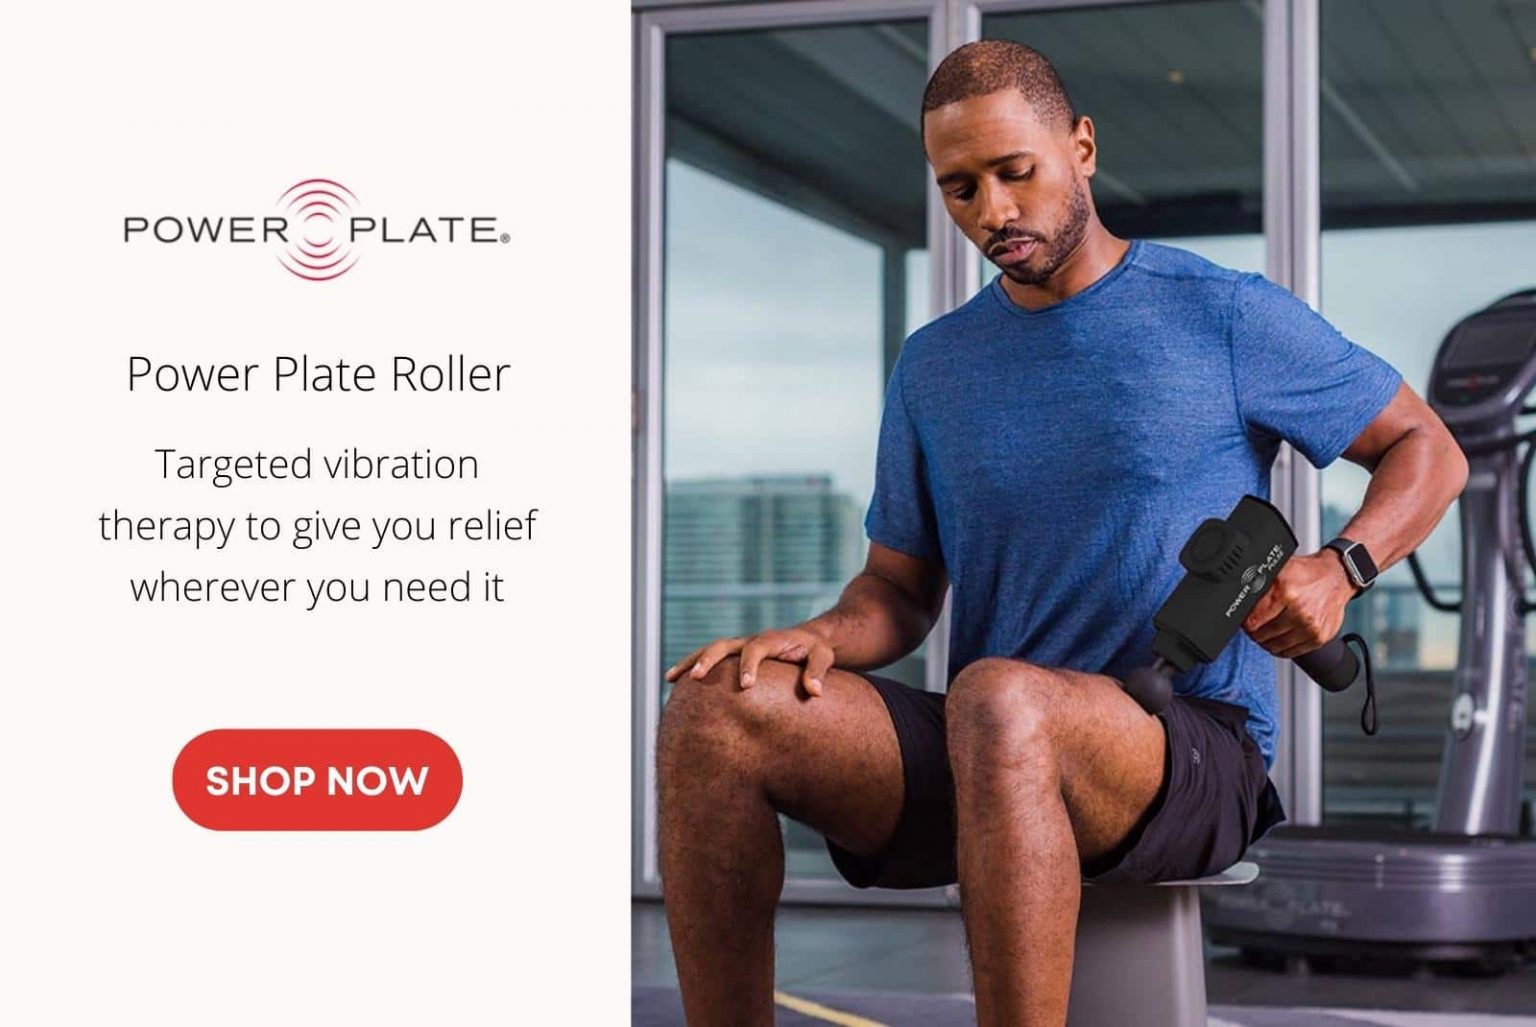 Get targeted vibration therapy to give you relief from pain and aid muscle recovery with the Power Plate Pulse